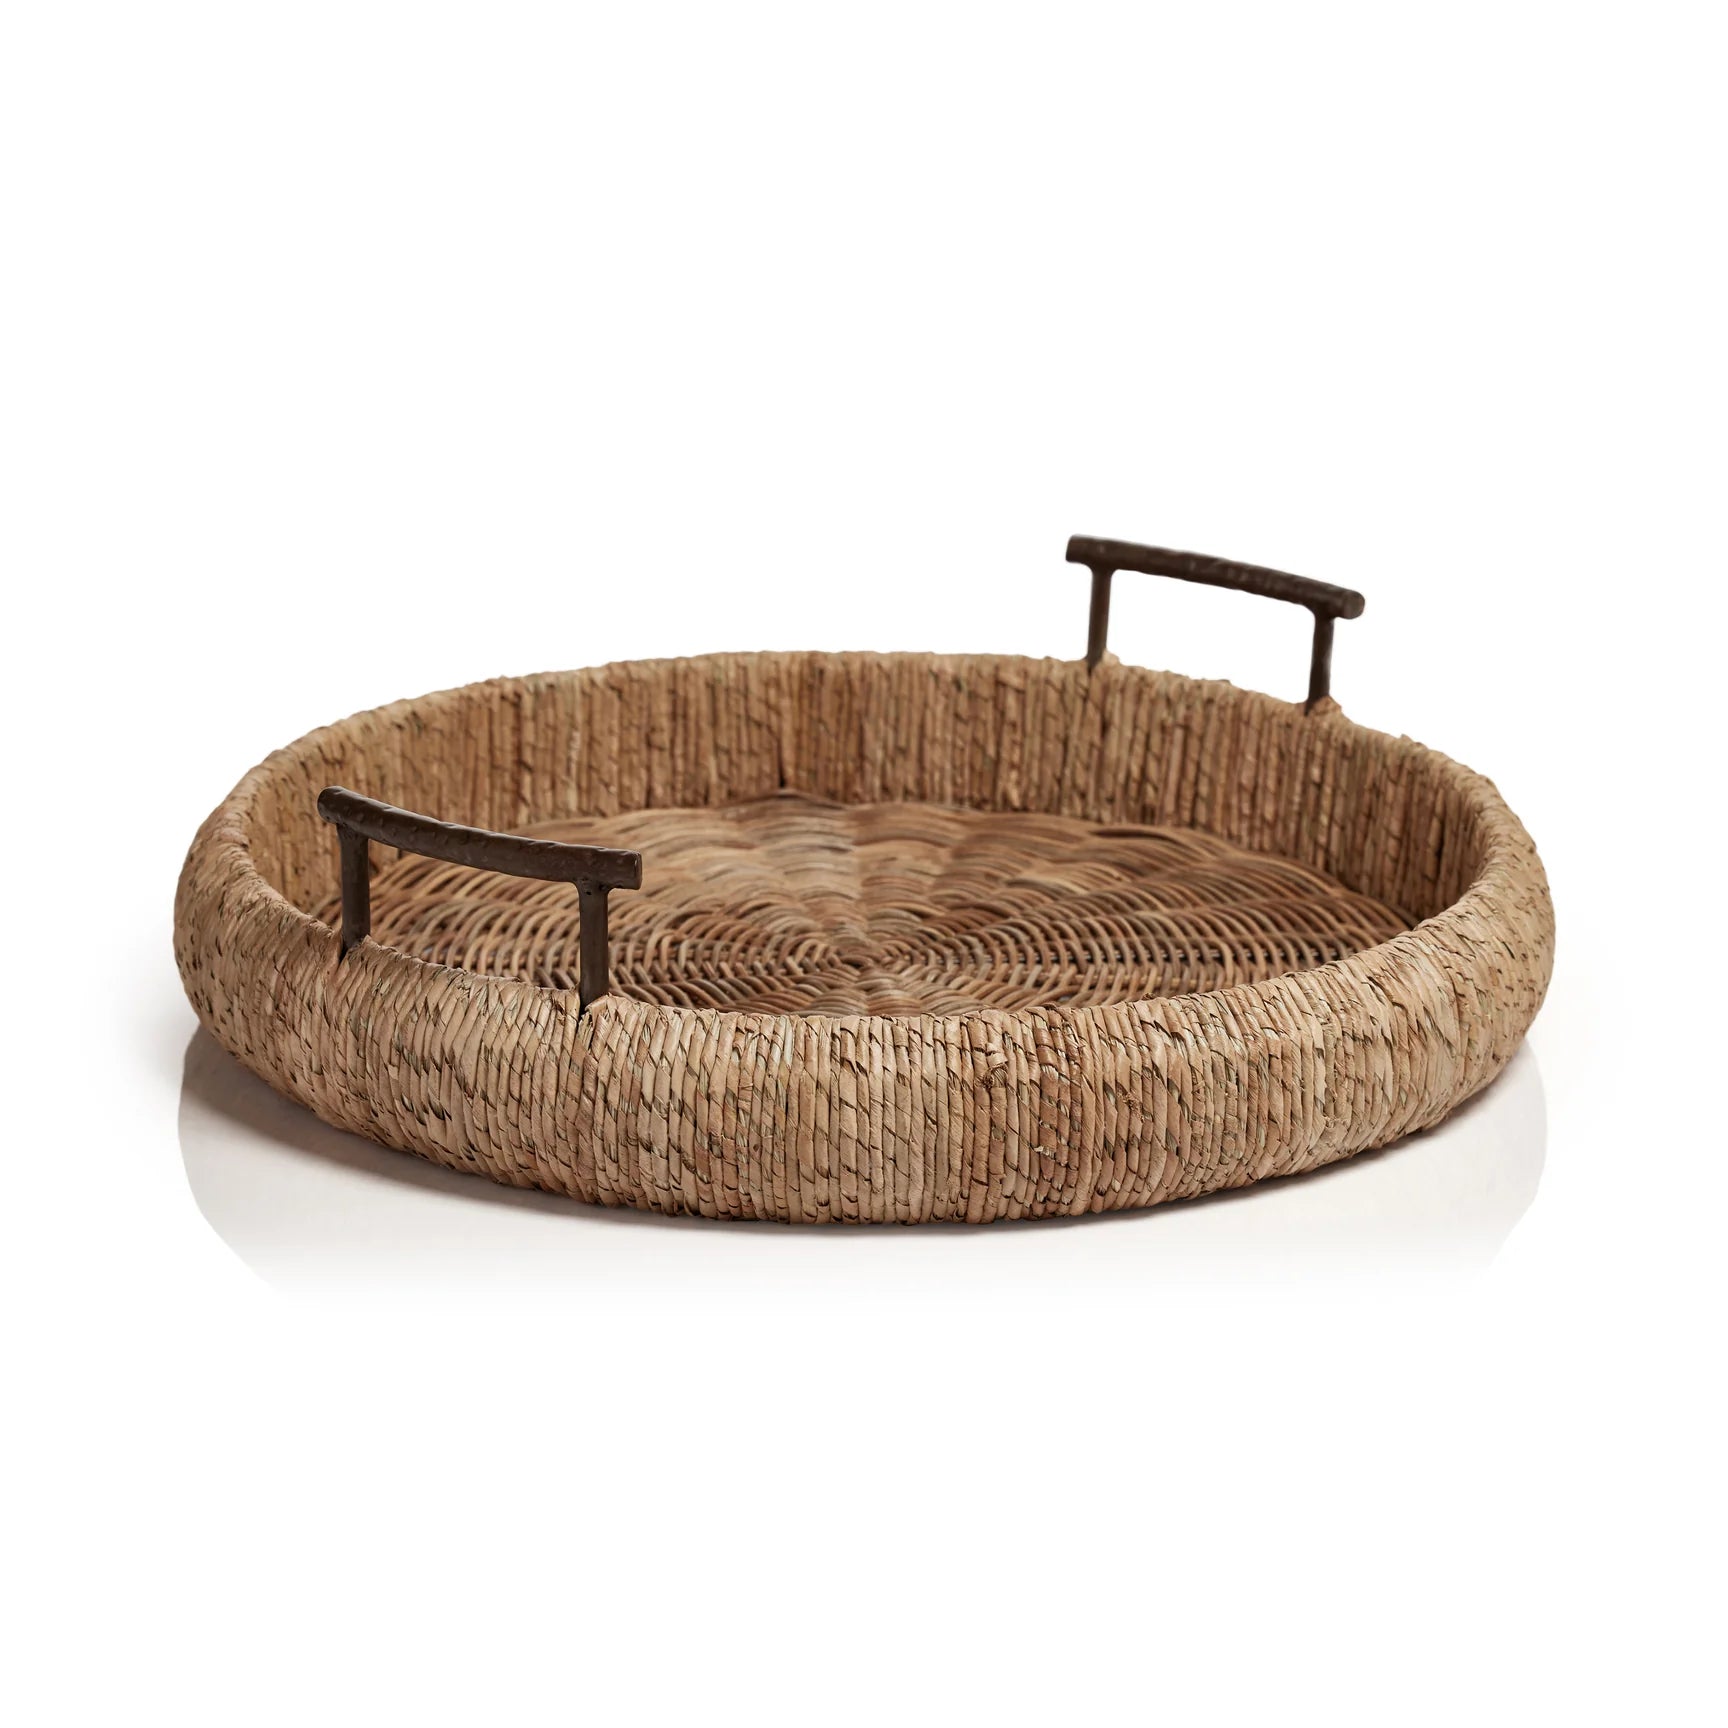 Single Rope Seagrass Tray